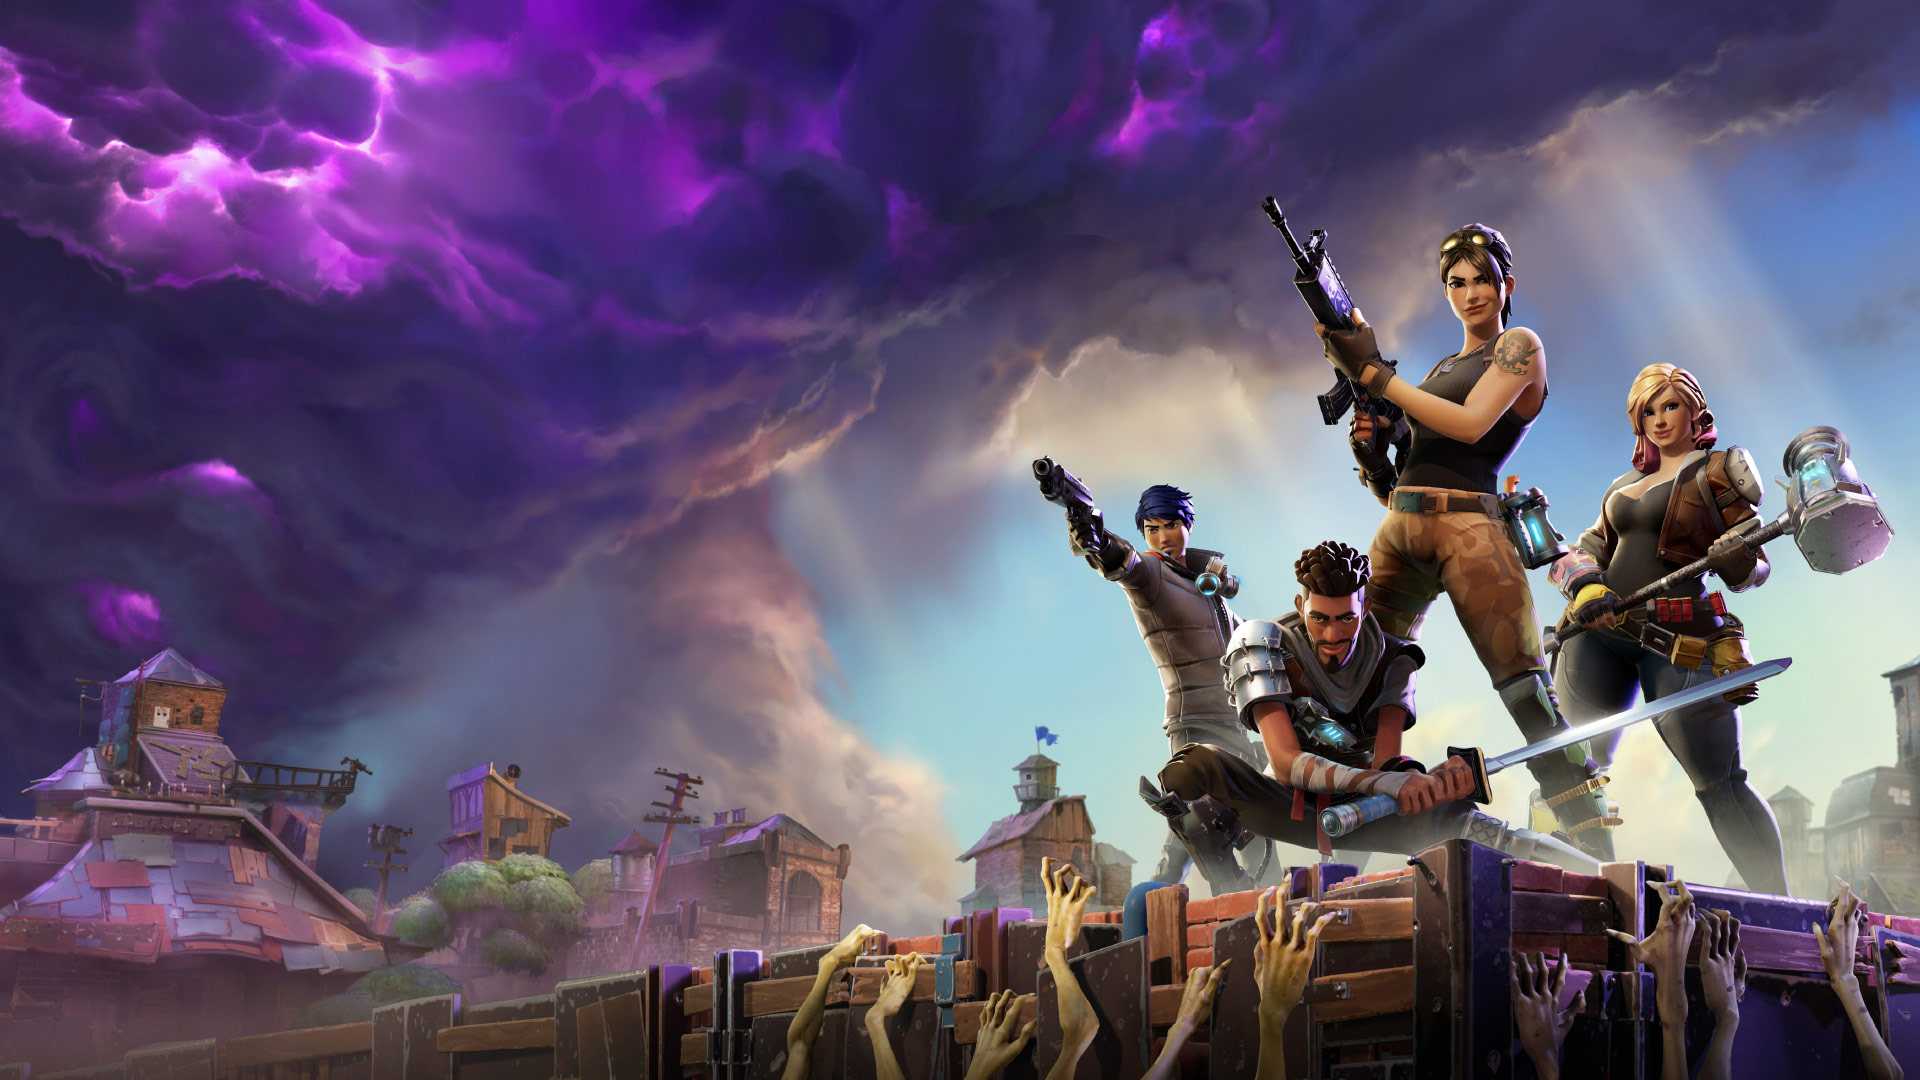 Fortnite on an iPhone X is an exciting look at the future of mobile gaming  - The Verge